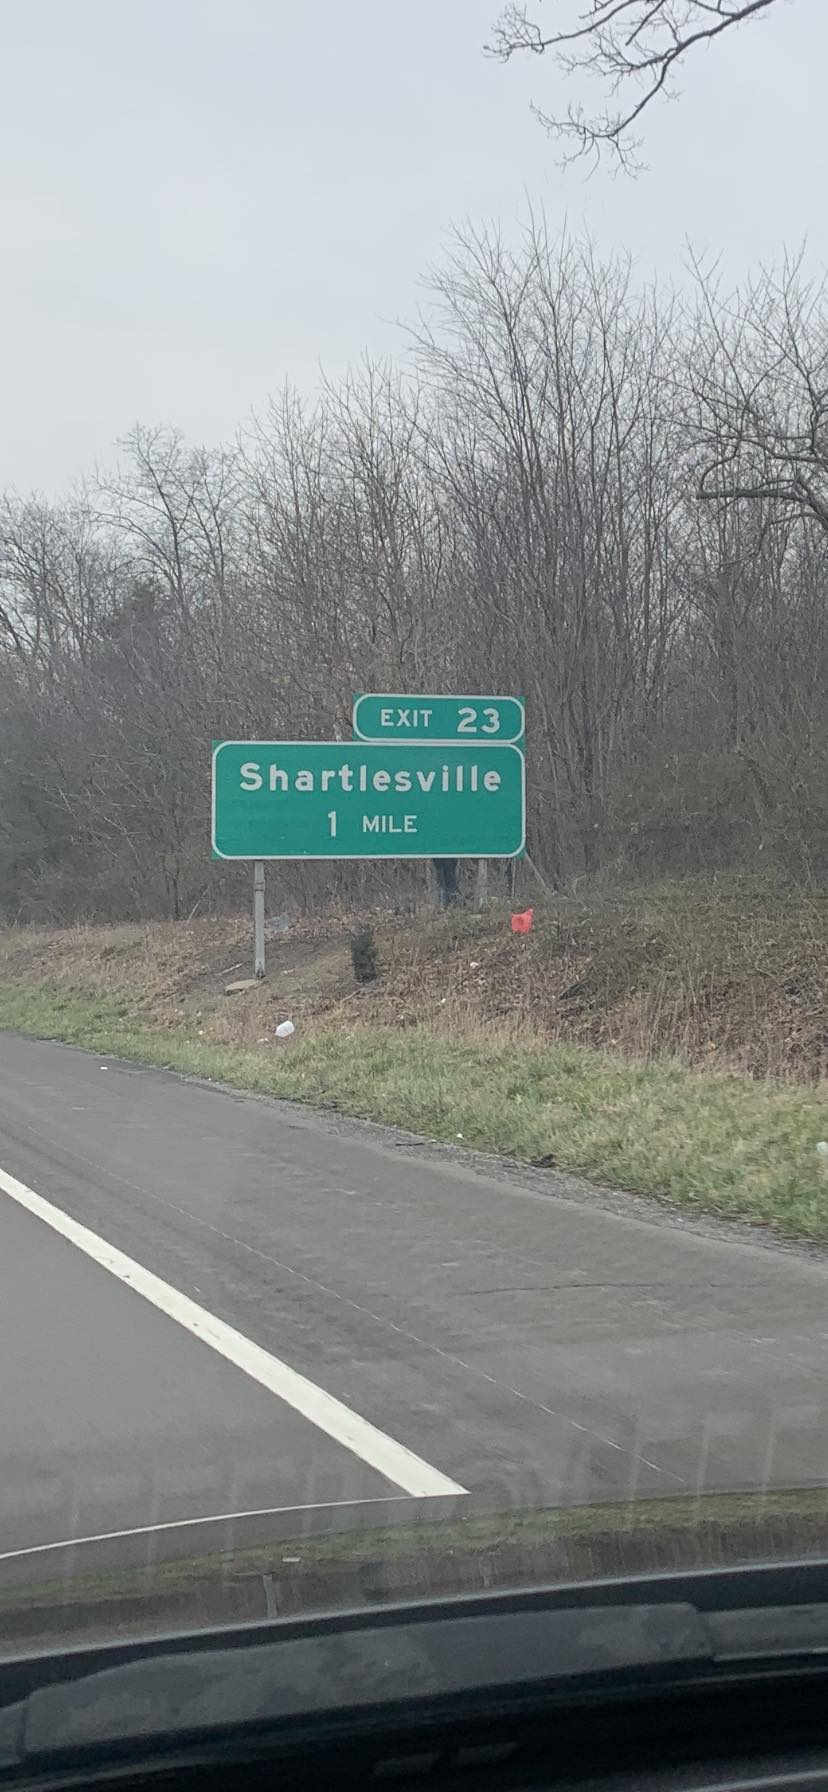 May be an image of road, tree and text that says 'EXIT 23 Shartlesville 1 MILE'